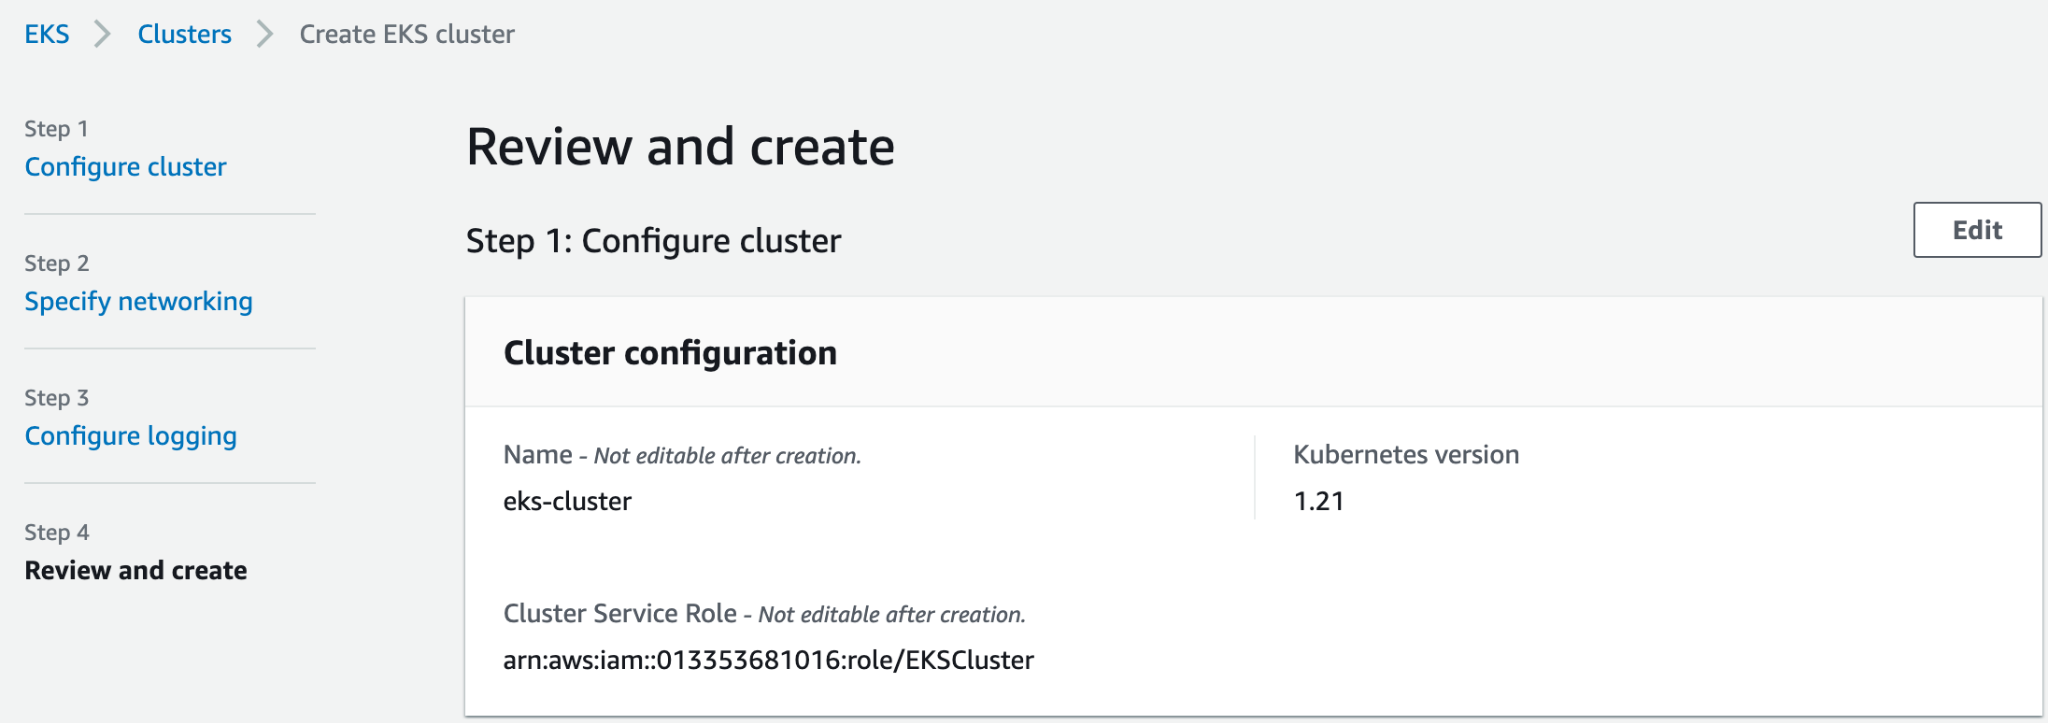 EKS Cluster - Review and create